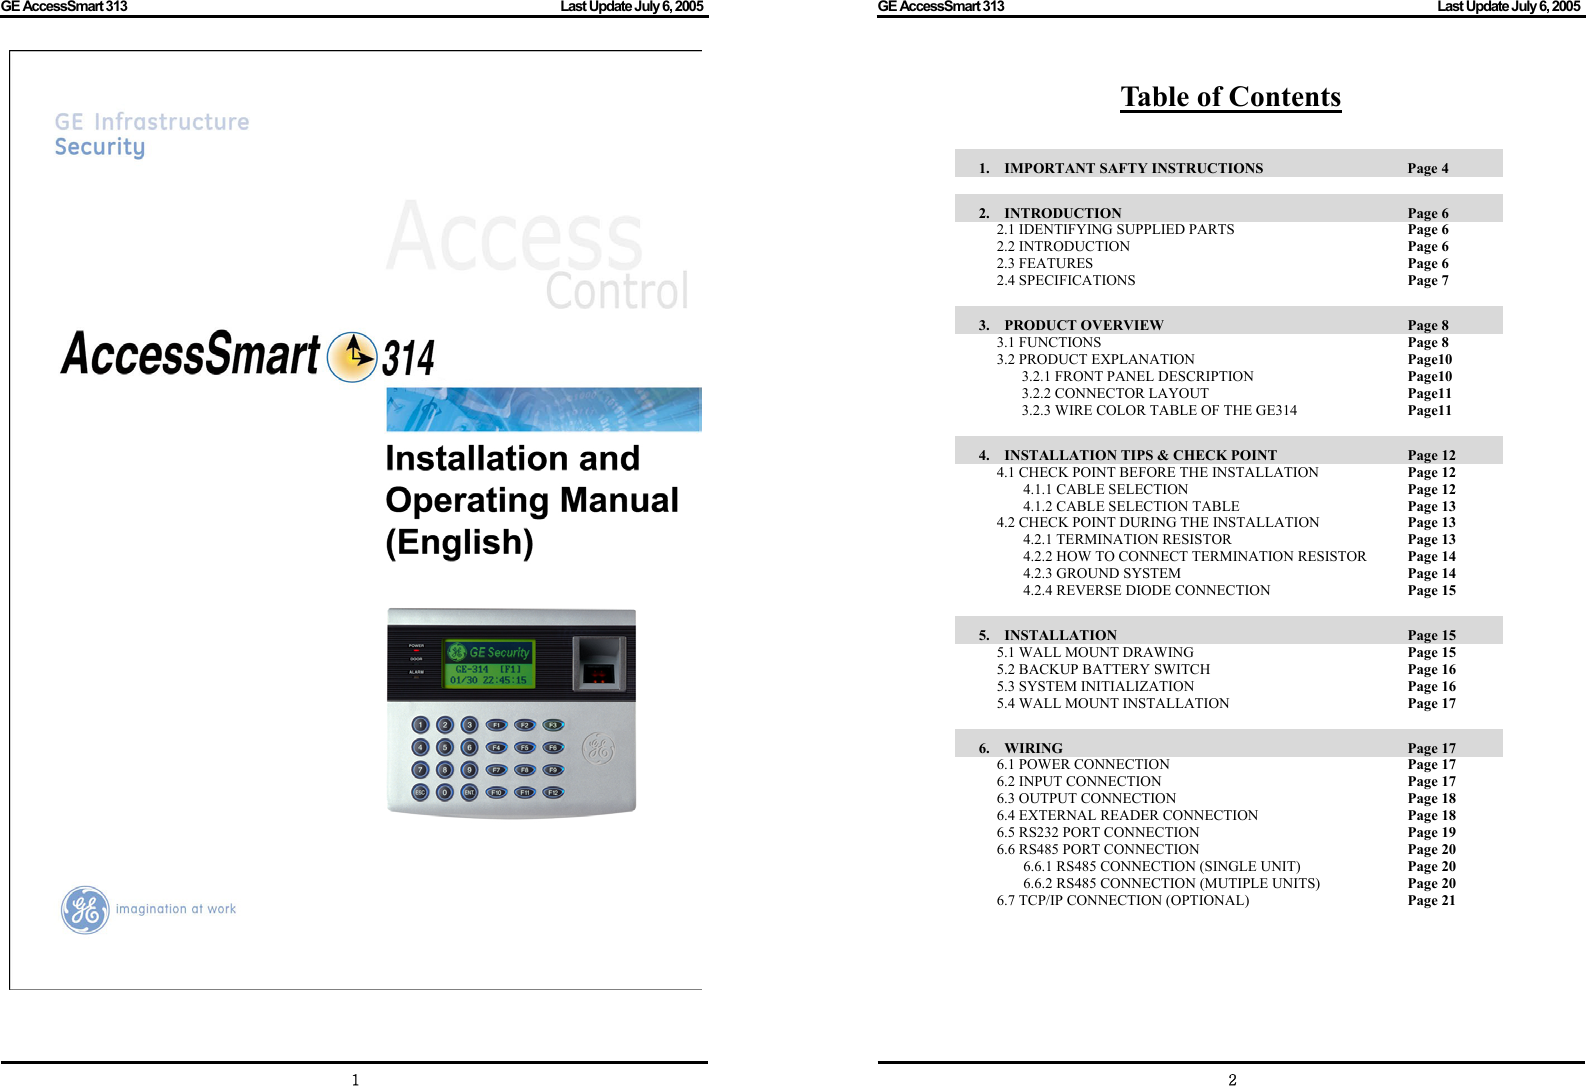 GE AccessSmart 313                                                                                         Last Update July 6, 2005   1   GE AccessSmart 313                                                                                         Last Update July 6, 2005   2Table of Contents  1.  IMPORTANT SAFTY INSTRUCTIONS      Page 4  2.  INTRODUCTION               Page 6 2.1 IDENTIFYING SUPPLIED PARTS        Page 6 2.2 INTRODUCTION      Page 6 2.3 FEATURES       Page 6 2.4 SPECIFICATIONS      Page 7  3.  PRODUCT OVERVIEW              Page 8 3.1 FUNCTIONS       Page 8 3.2 PRODUCT EXPLANATION        Page10 3.2.1 FRONT PANEL DESCRIPTION      Page10 3.2.2 CONNECTOR LAYOUT    Page11 3.2.3 WIRE COLOR TABLE OF THE GE314    Page11  4.  INSTALLATION TIPS &amp; CHECK POINT           Page 12 4.1 CHECK POINT BEFORE THE INSTALLATION      Page 12 4.1.1 CABLE SELECTION          Page 12 4.1.2 CABLE SELECTION TABLE        Page 13 4.2 CHECK POINT DURING THE INSTALLATION      Page 13 4.2.1 TERMINATION RESISTOR        Page 13 4.2.2 HOW TO CONNECT TERMINATION RESISTOR    Page 14 4.2.3 GROUND SYSTEM     Page 14 4.2.4 REVERSE DIODE CONNECTION        Page 15  5.  INSTALLATION               Page 15 5.1 WALL MOUNT DRAWING          Page 15 5.2 BACKUP BATTERY SWITCH     Page 16 5.3 SYSTEM INITIALIZATION            Page 16 5.4 WALL MOUNT INSTALLATION        Page 17  6.  WIRING                 Page 17 6.1 POWER CONNECTION     Page 17 6.2 INPUT CONNECTION      Page 17 6.3 OUTPUT CONNECTION          Page 18 6.4 EXTERNAL READER CONNECTION        Page 18 6.5 RS232 PORT CONNECTION          Page 19 6.6 RS485 PORT CONNECTION          Page 20 6.6.1 RS485 CONNECTION (SINGLE UNIT)      Page 20 6.6.2 RS485 CONNECTION (MUTIPLE UNITS)      Page 20 6.7 TCP/IP CONNECTION (OPTIONAL)        Page 21        